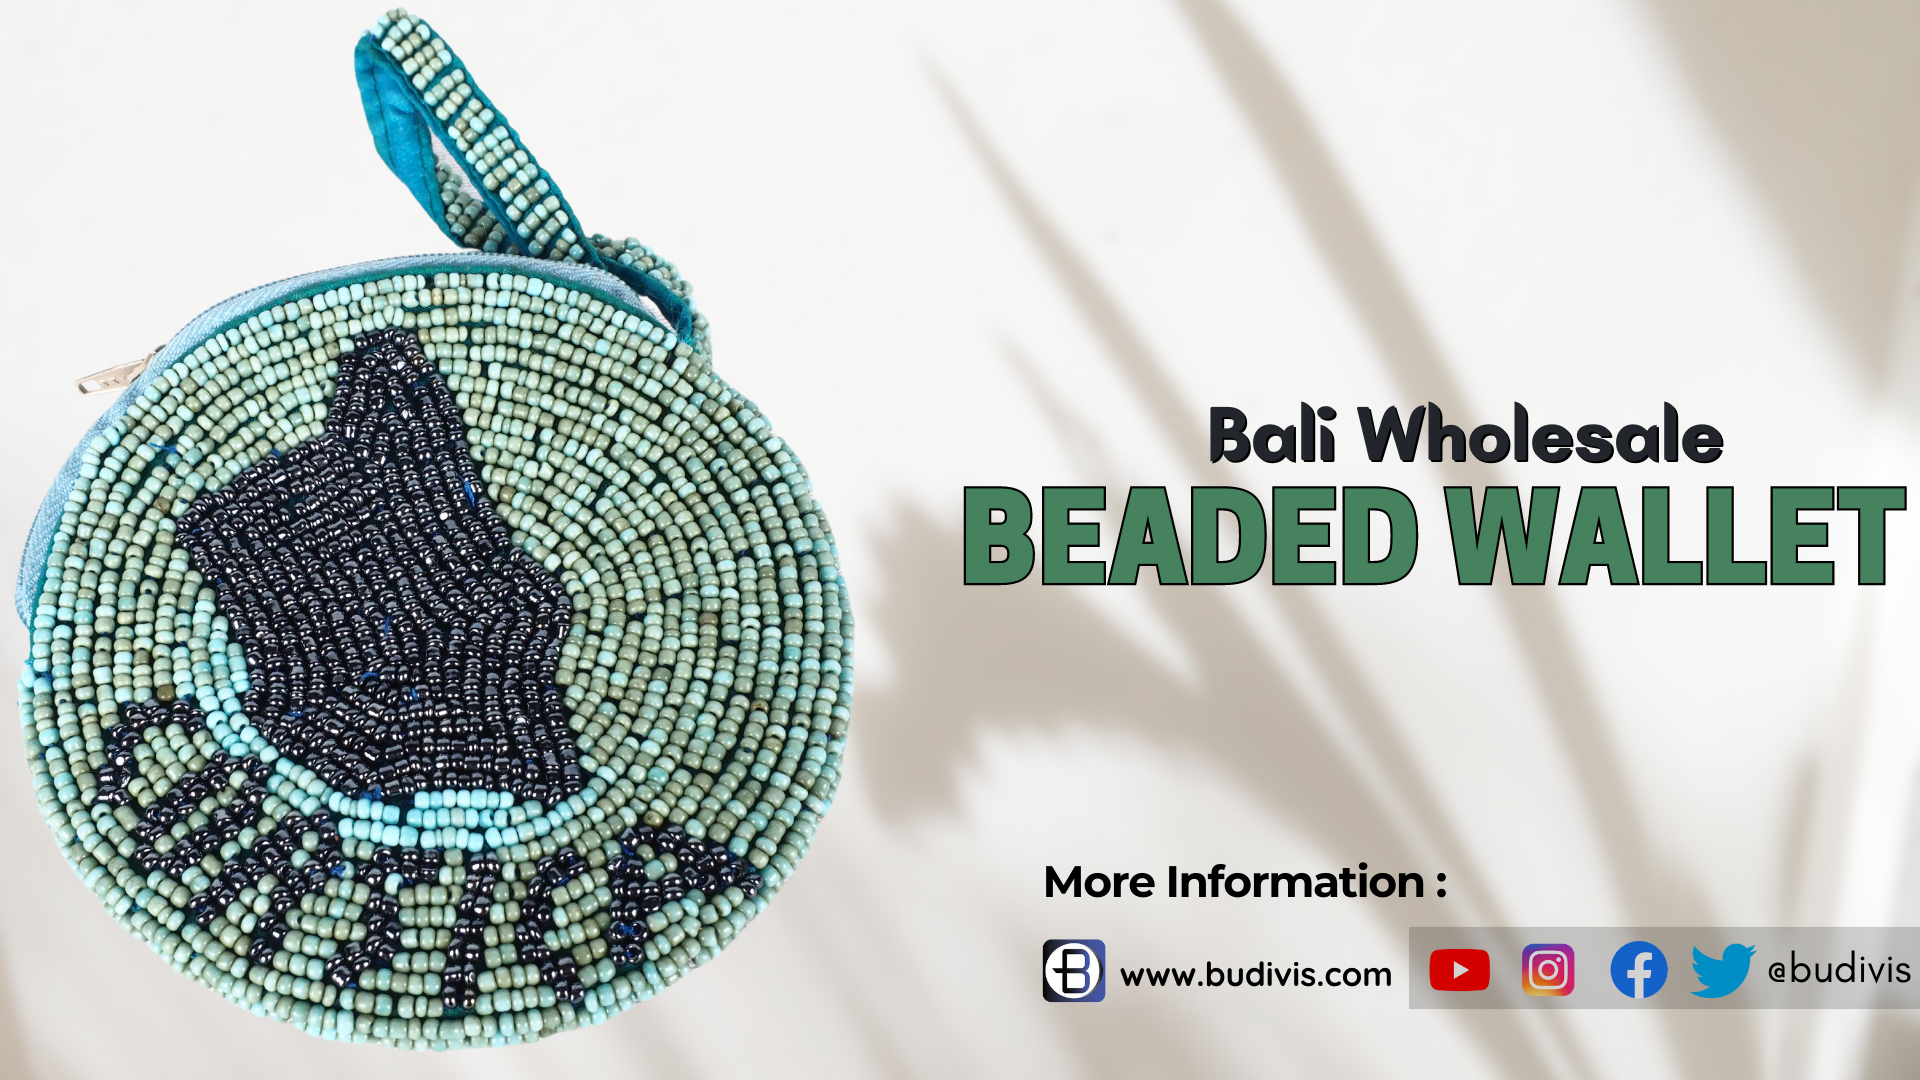 https://www.budivis.com/image/cache/catalog/A%20Blog/A%20blog%20pic/new/Beaded%20Wallet-1920x1080.png